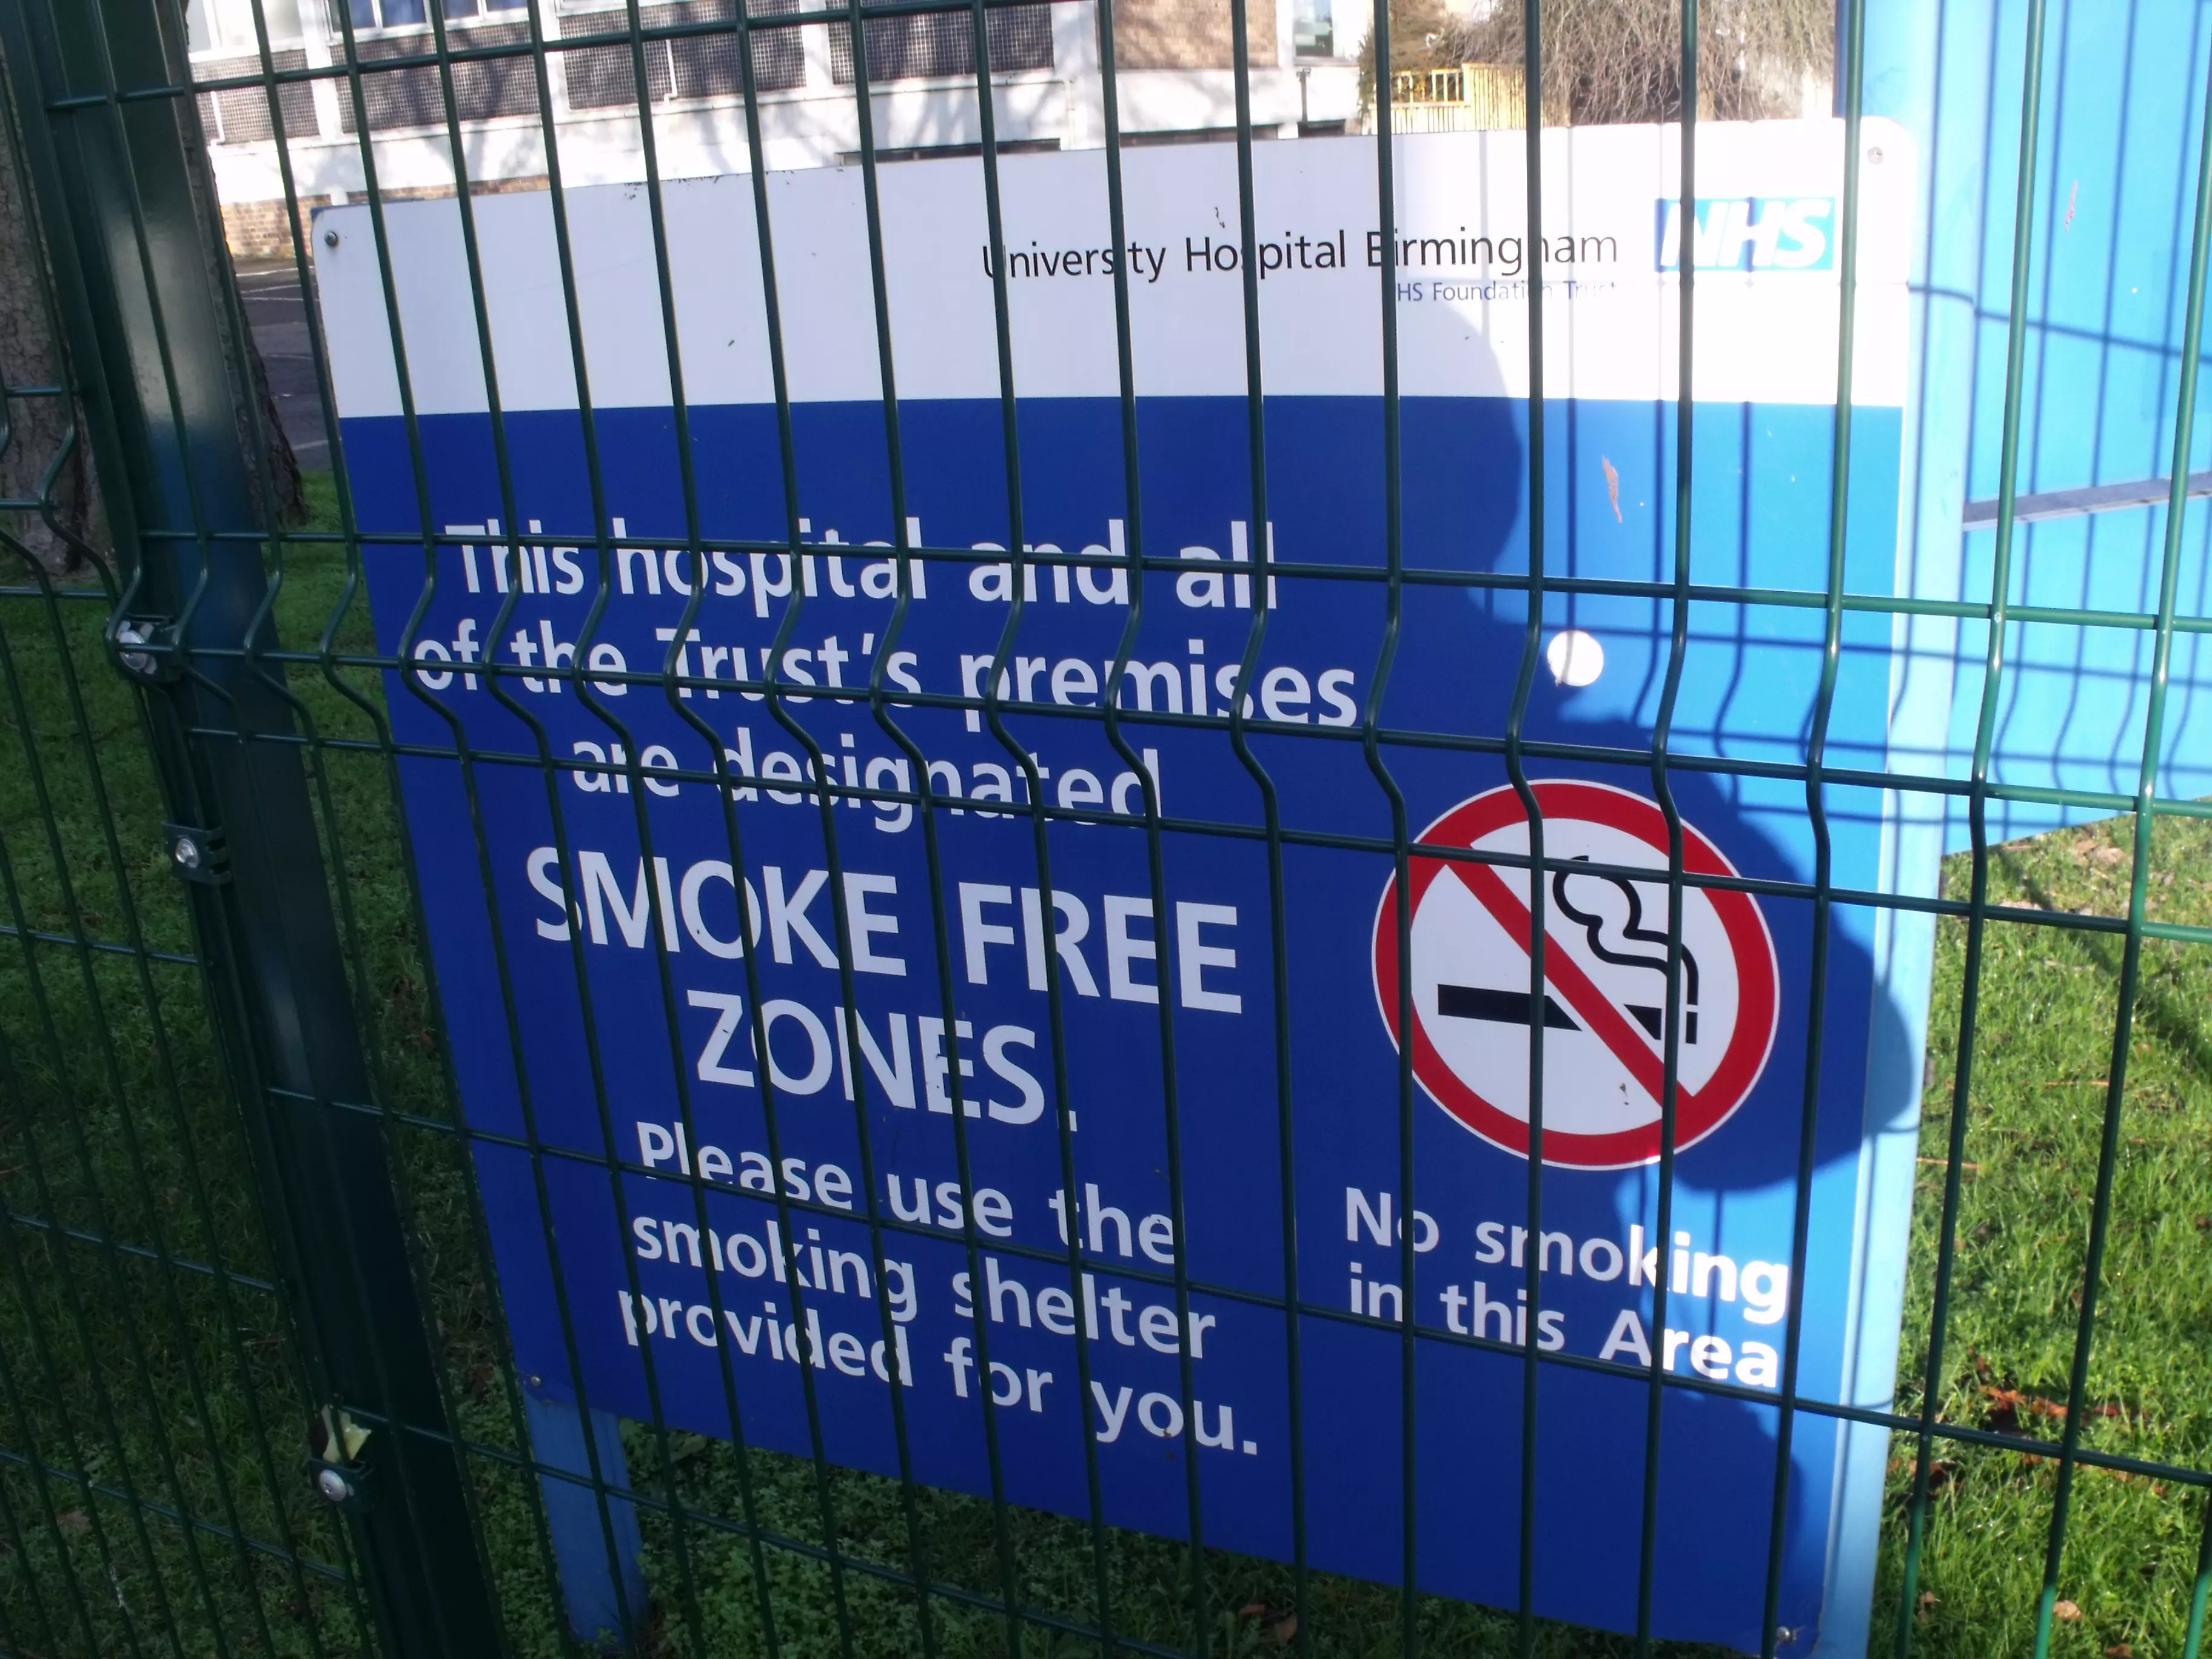 The concerned patient said he spotted people smoking outside the cancer ward.